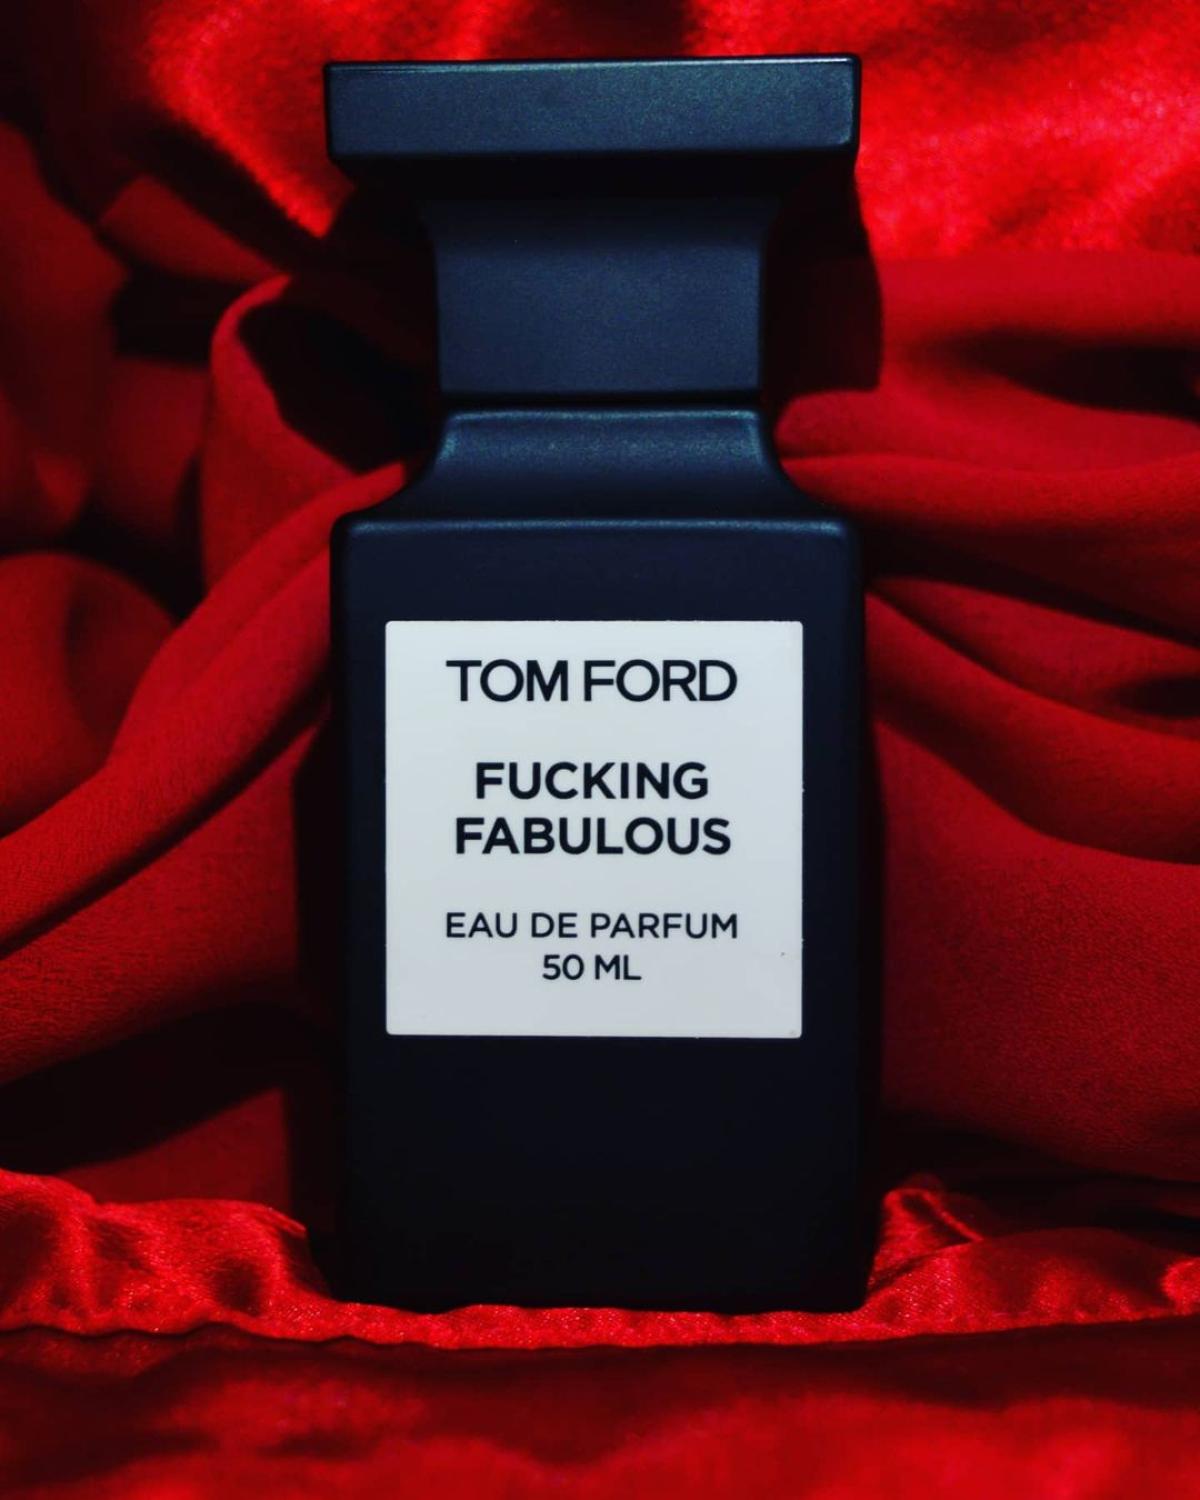 Fucking Fabulous Tom Ford perfume - a fragrance for women and men 2017